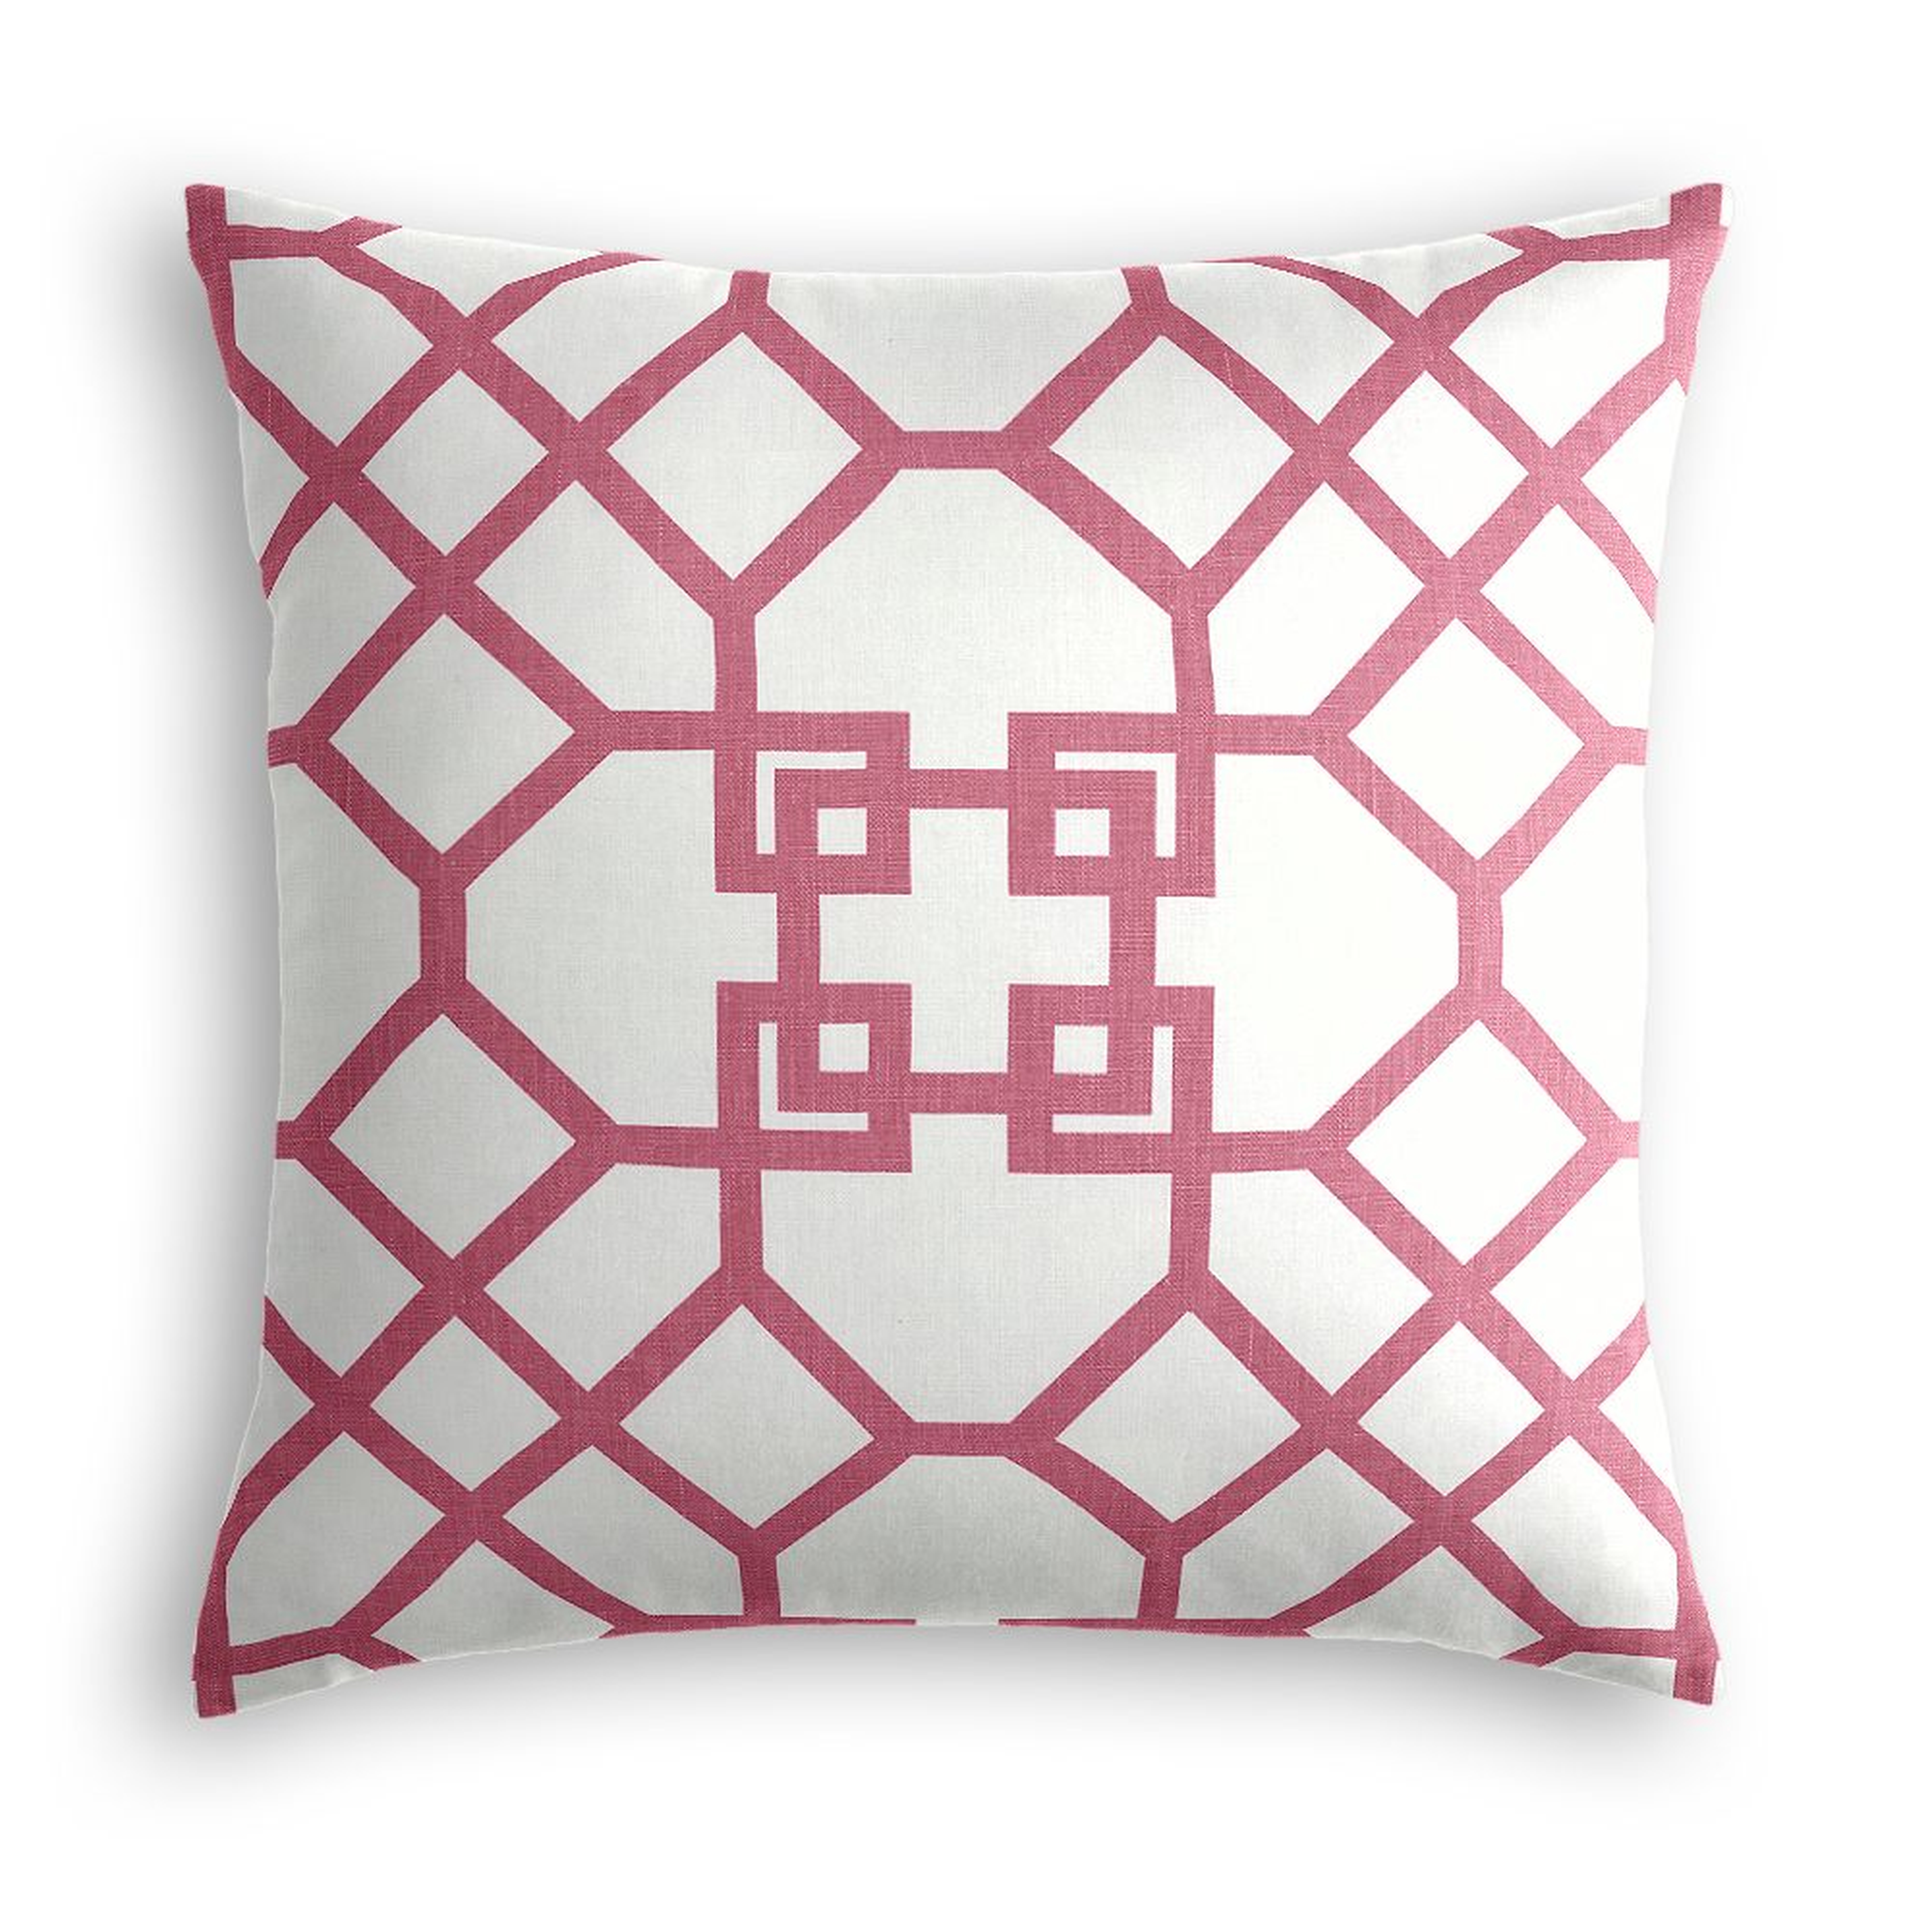 SIMPLE THROW PILLOW | in xu garden - orkid - 18" square - Down Insert - Loom Decor